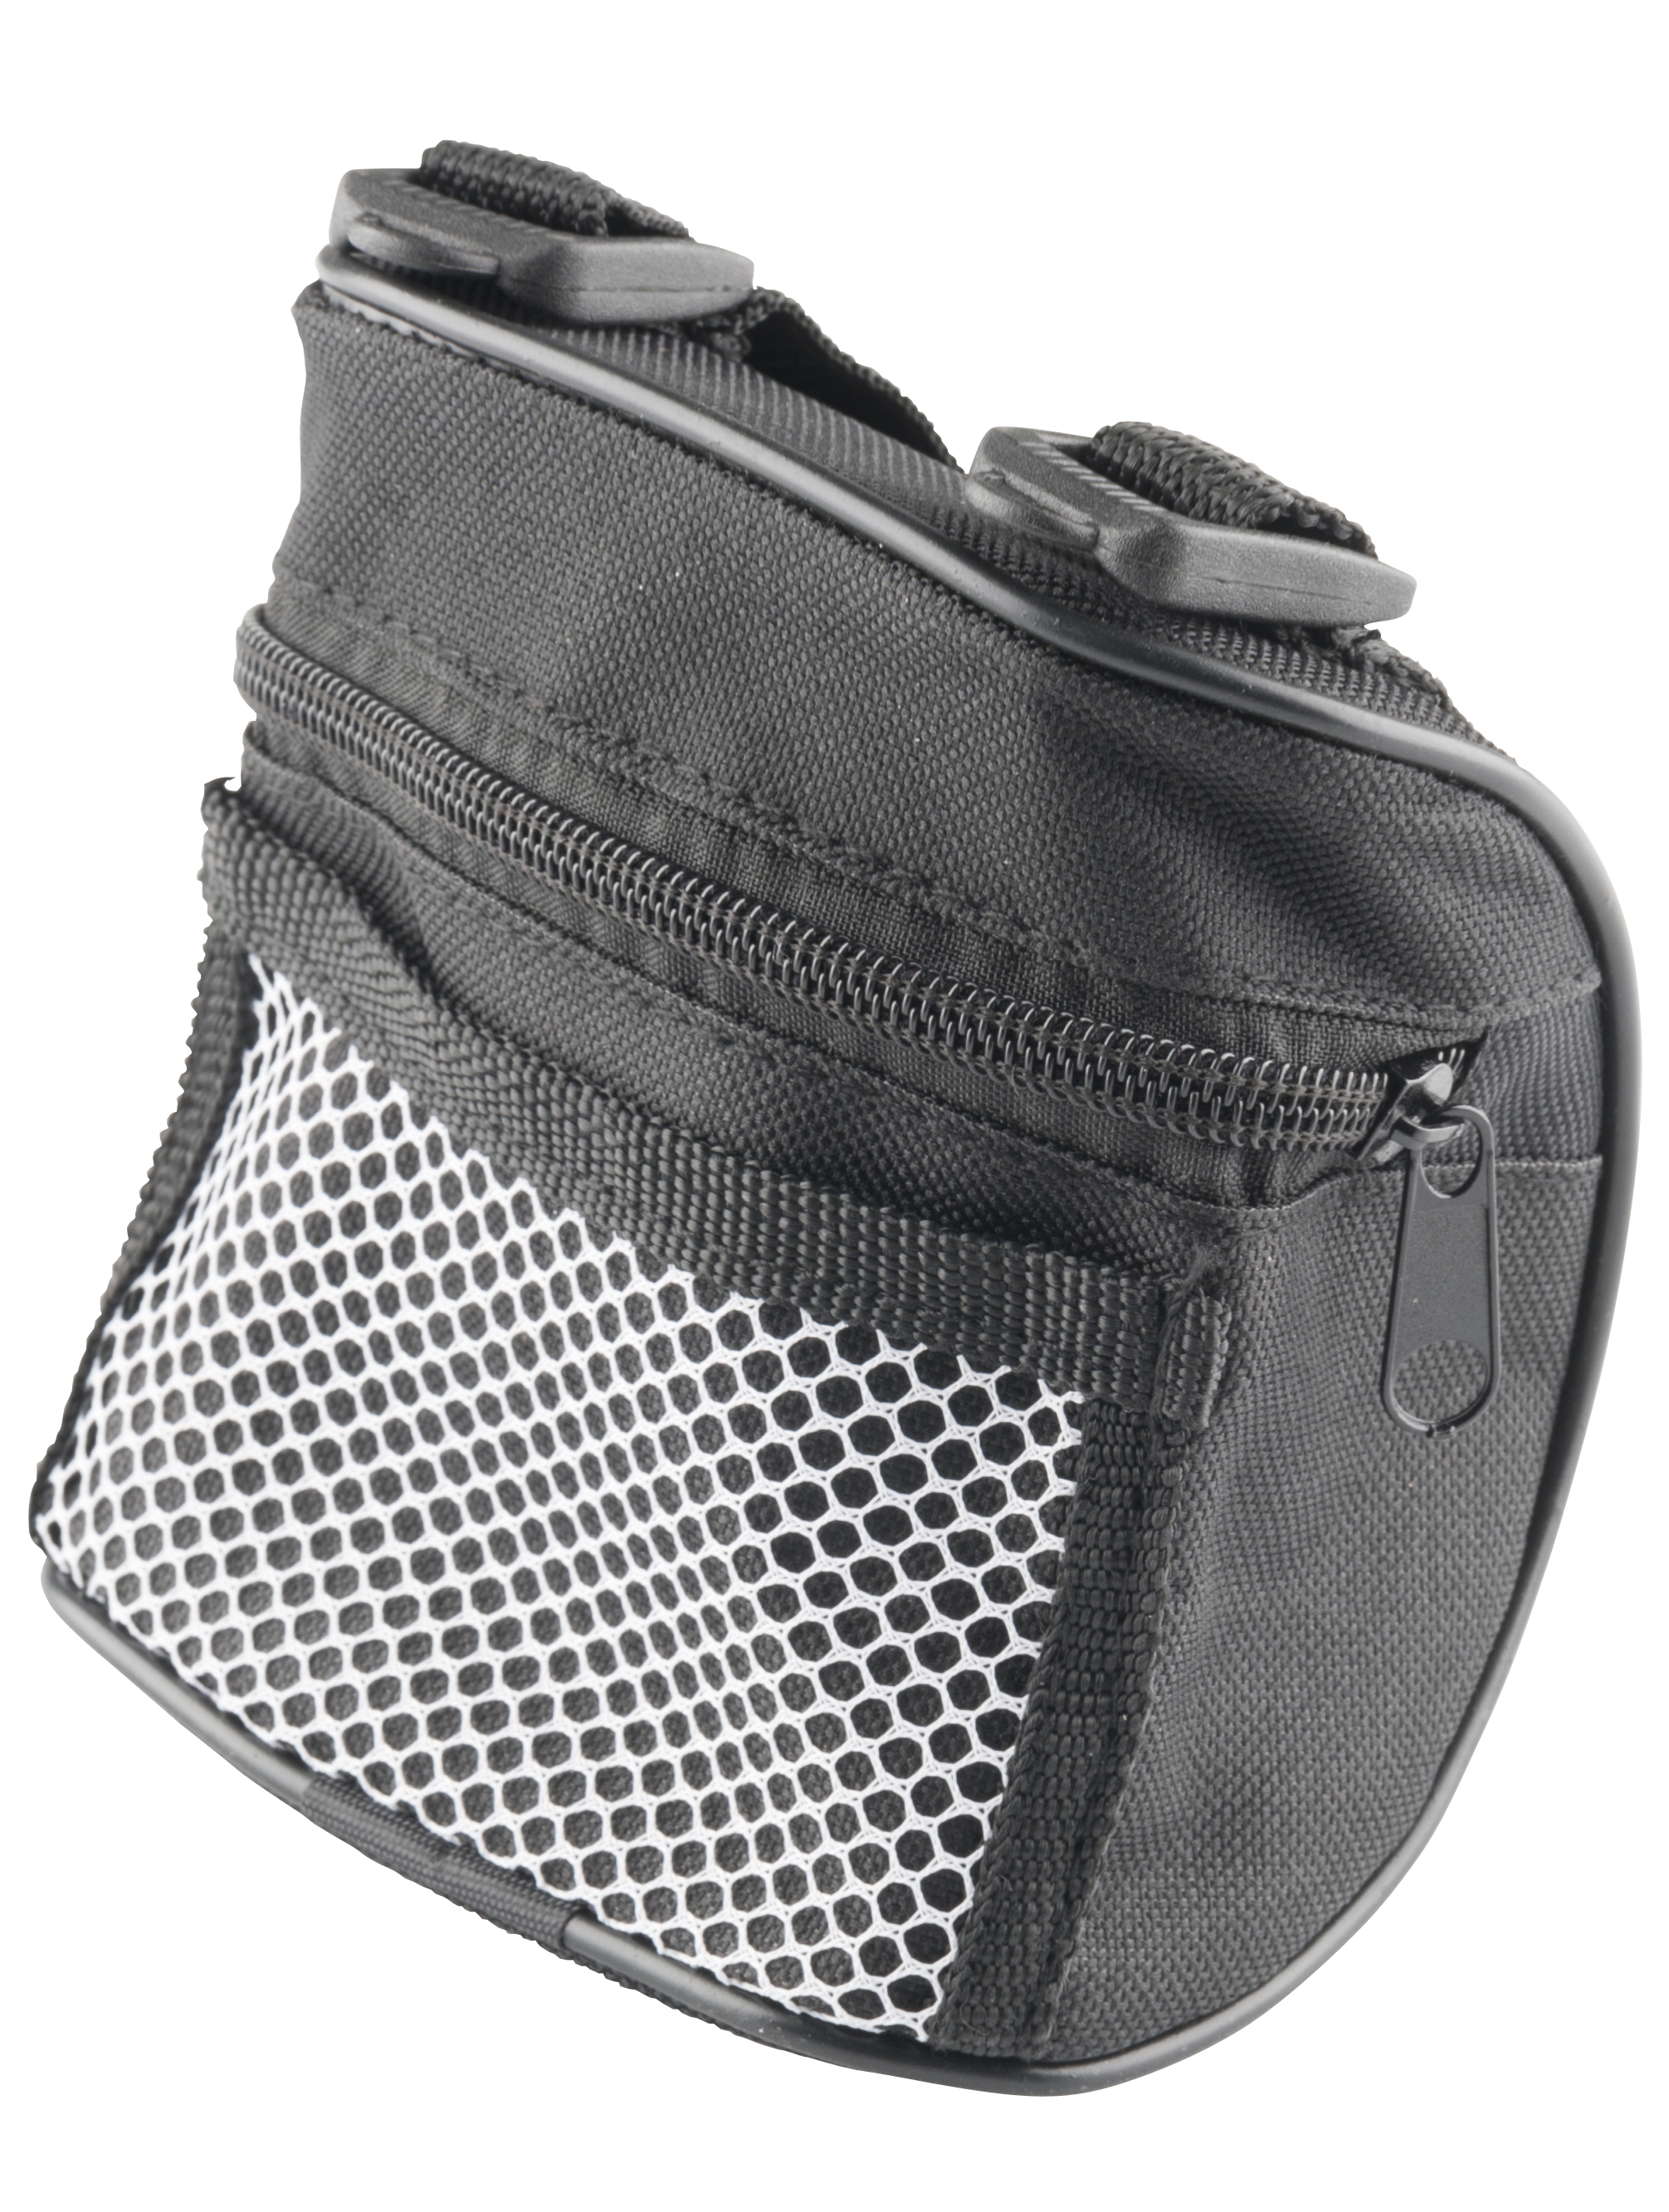 BICYCLE GEAR SADDLE BAG FOR BICYCLE